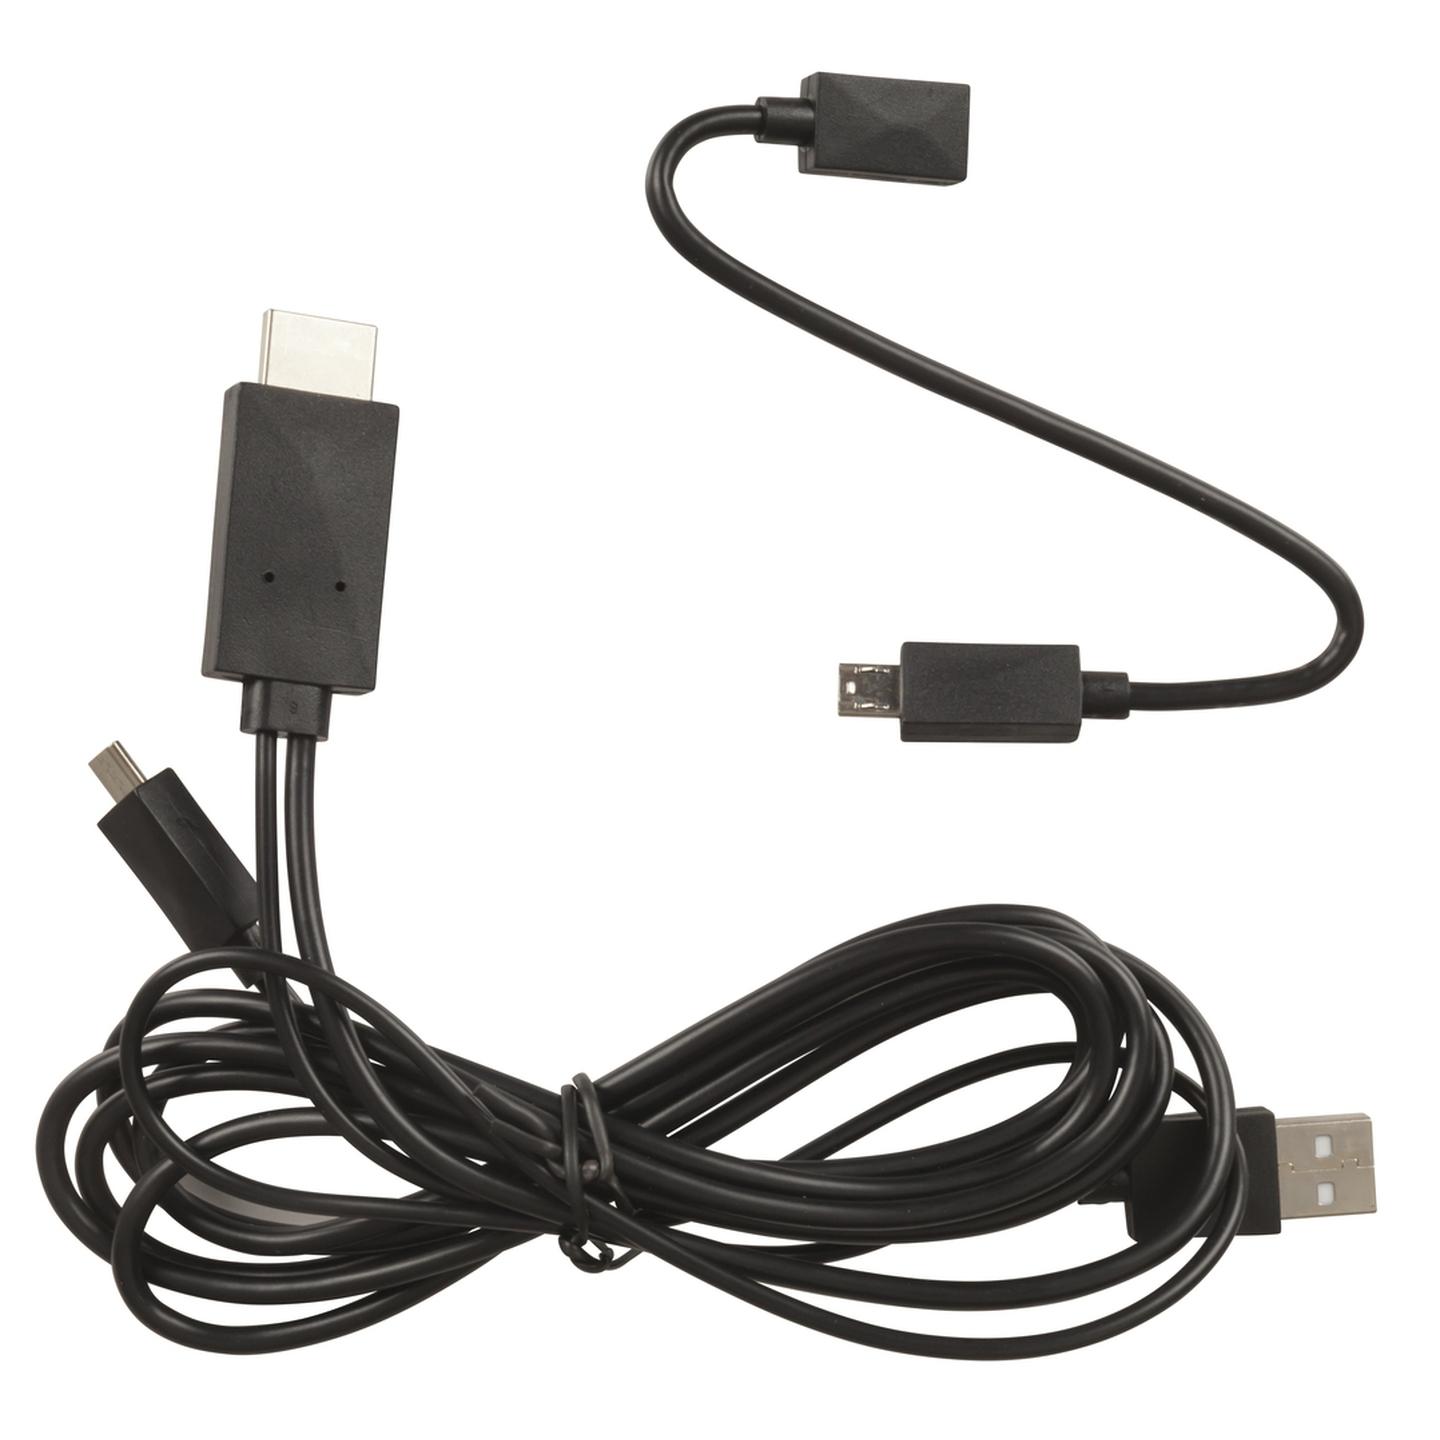 MHL to HDMI Cable with 11 Pin Samsung Adaptor - 2m